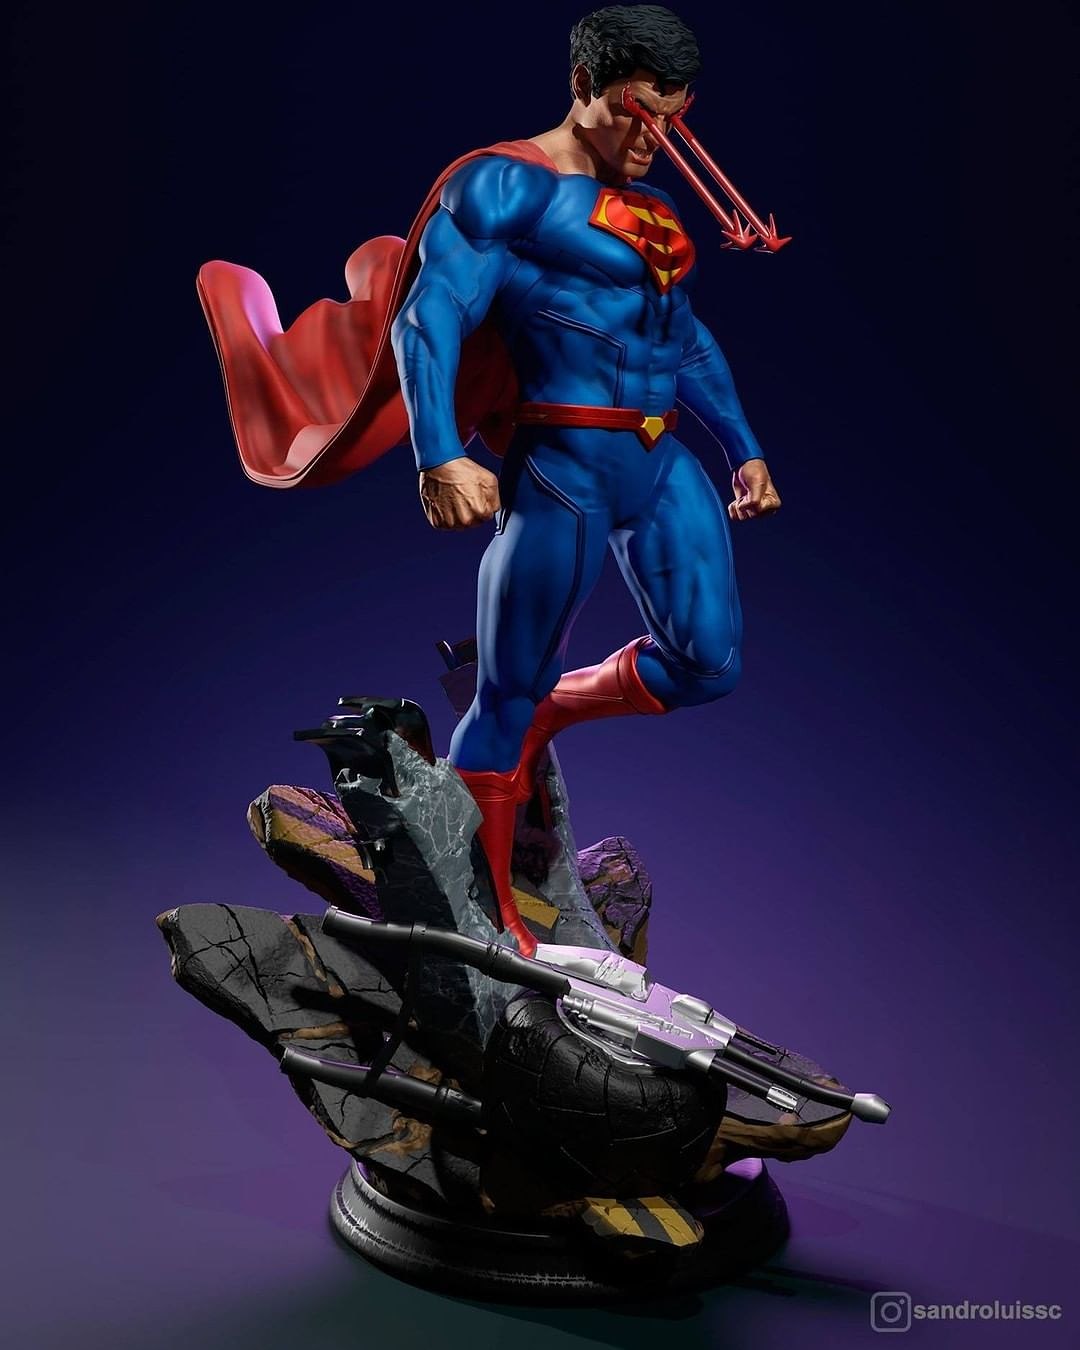 Superman V2 from DC